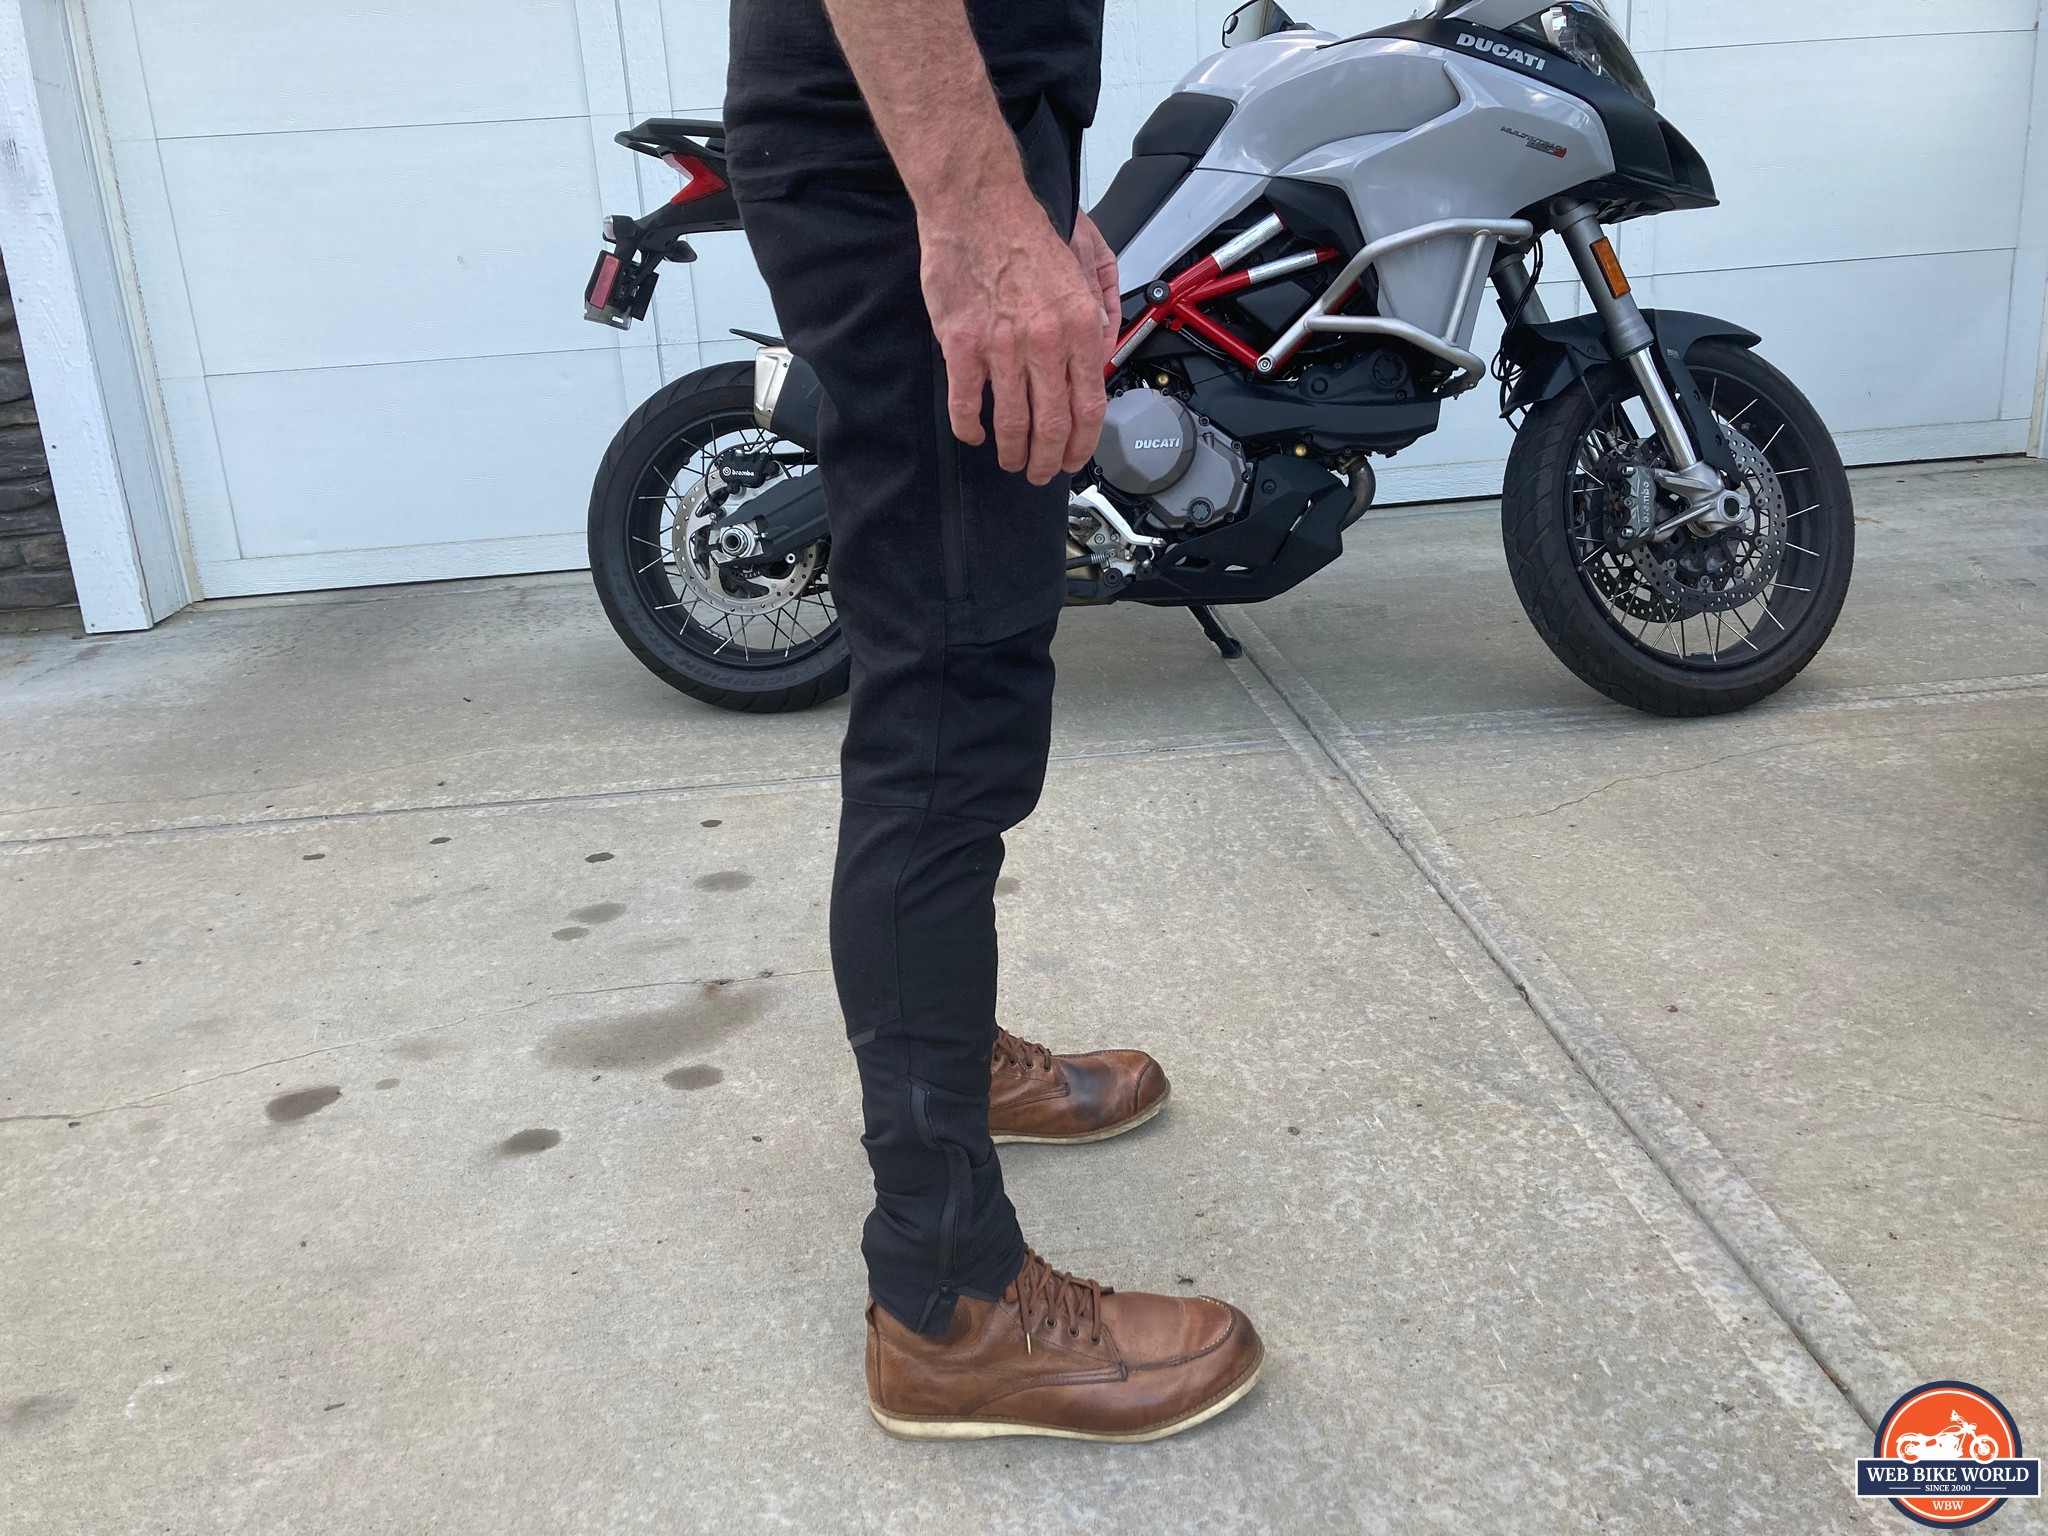 Motorcycle Pants  Best Fits For Style & Safety - RevZilla